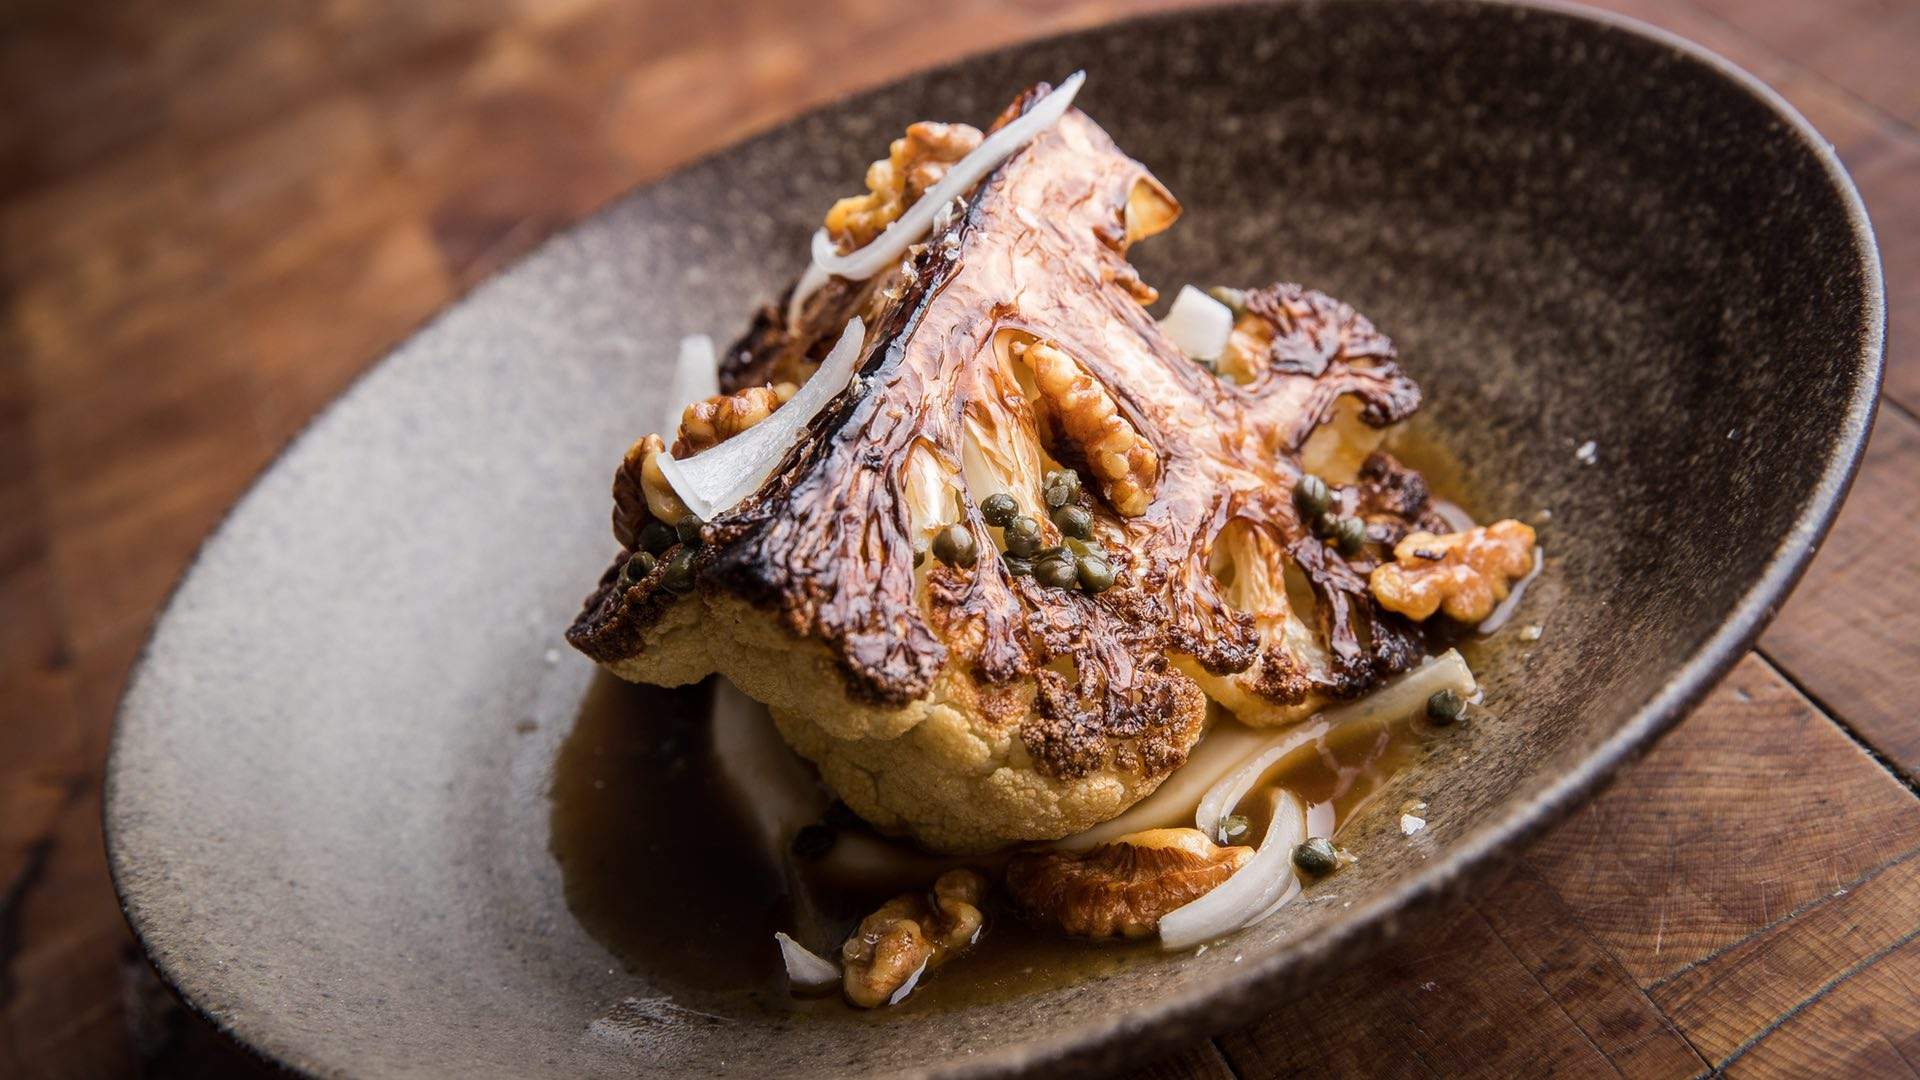 Newtown's Hartsyard Has Reopened with a Fresh Look and Menu